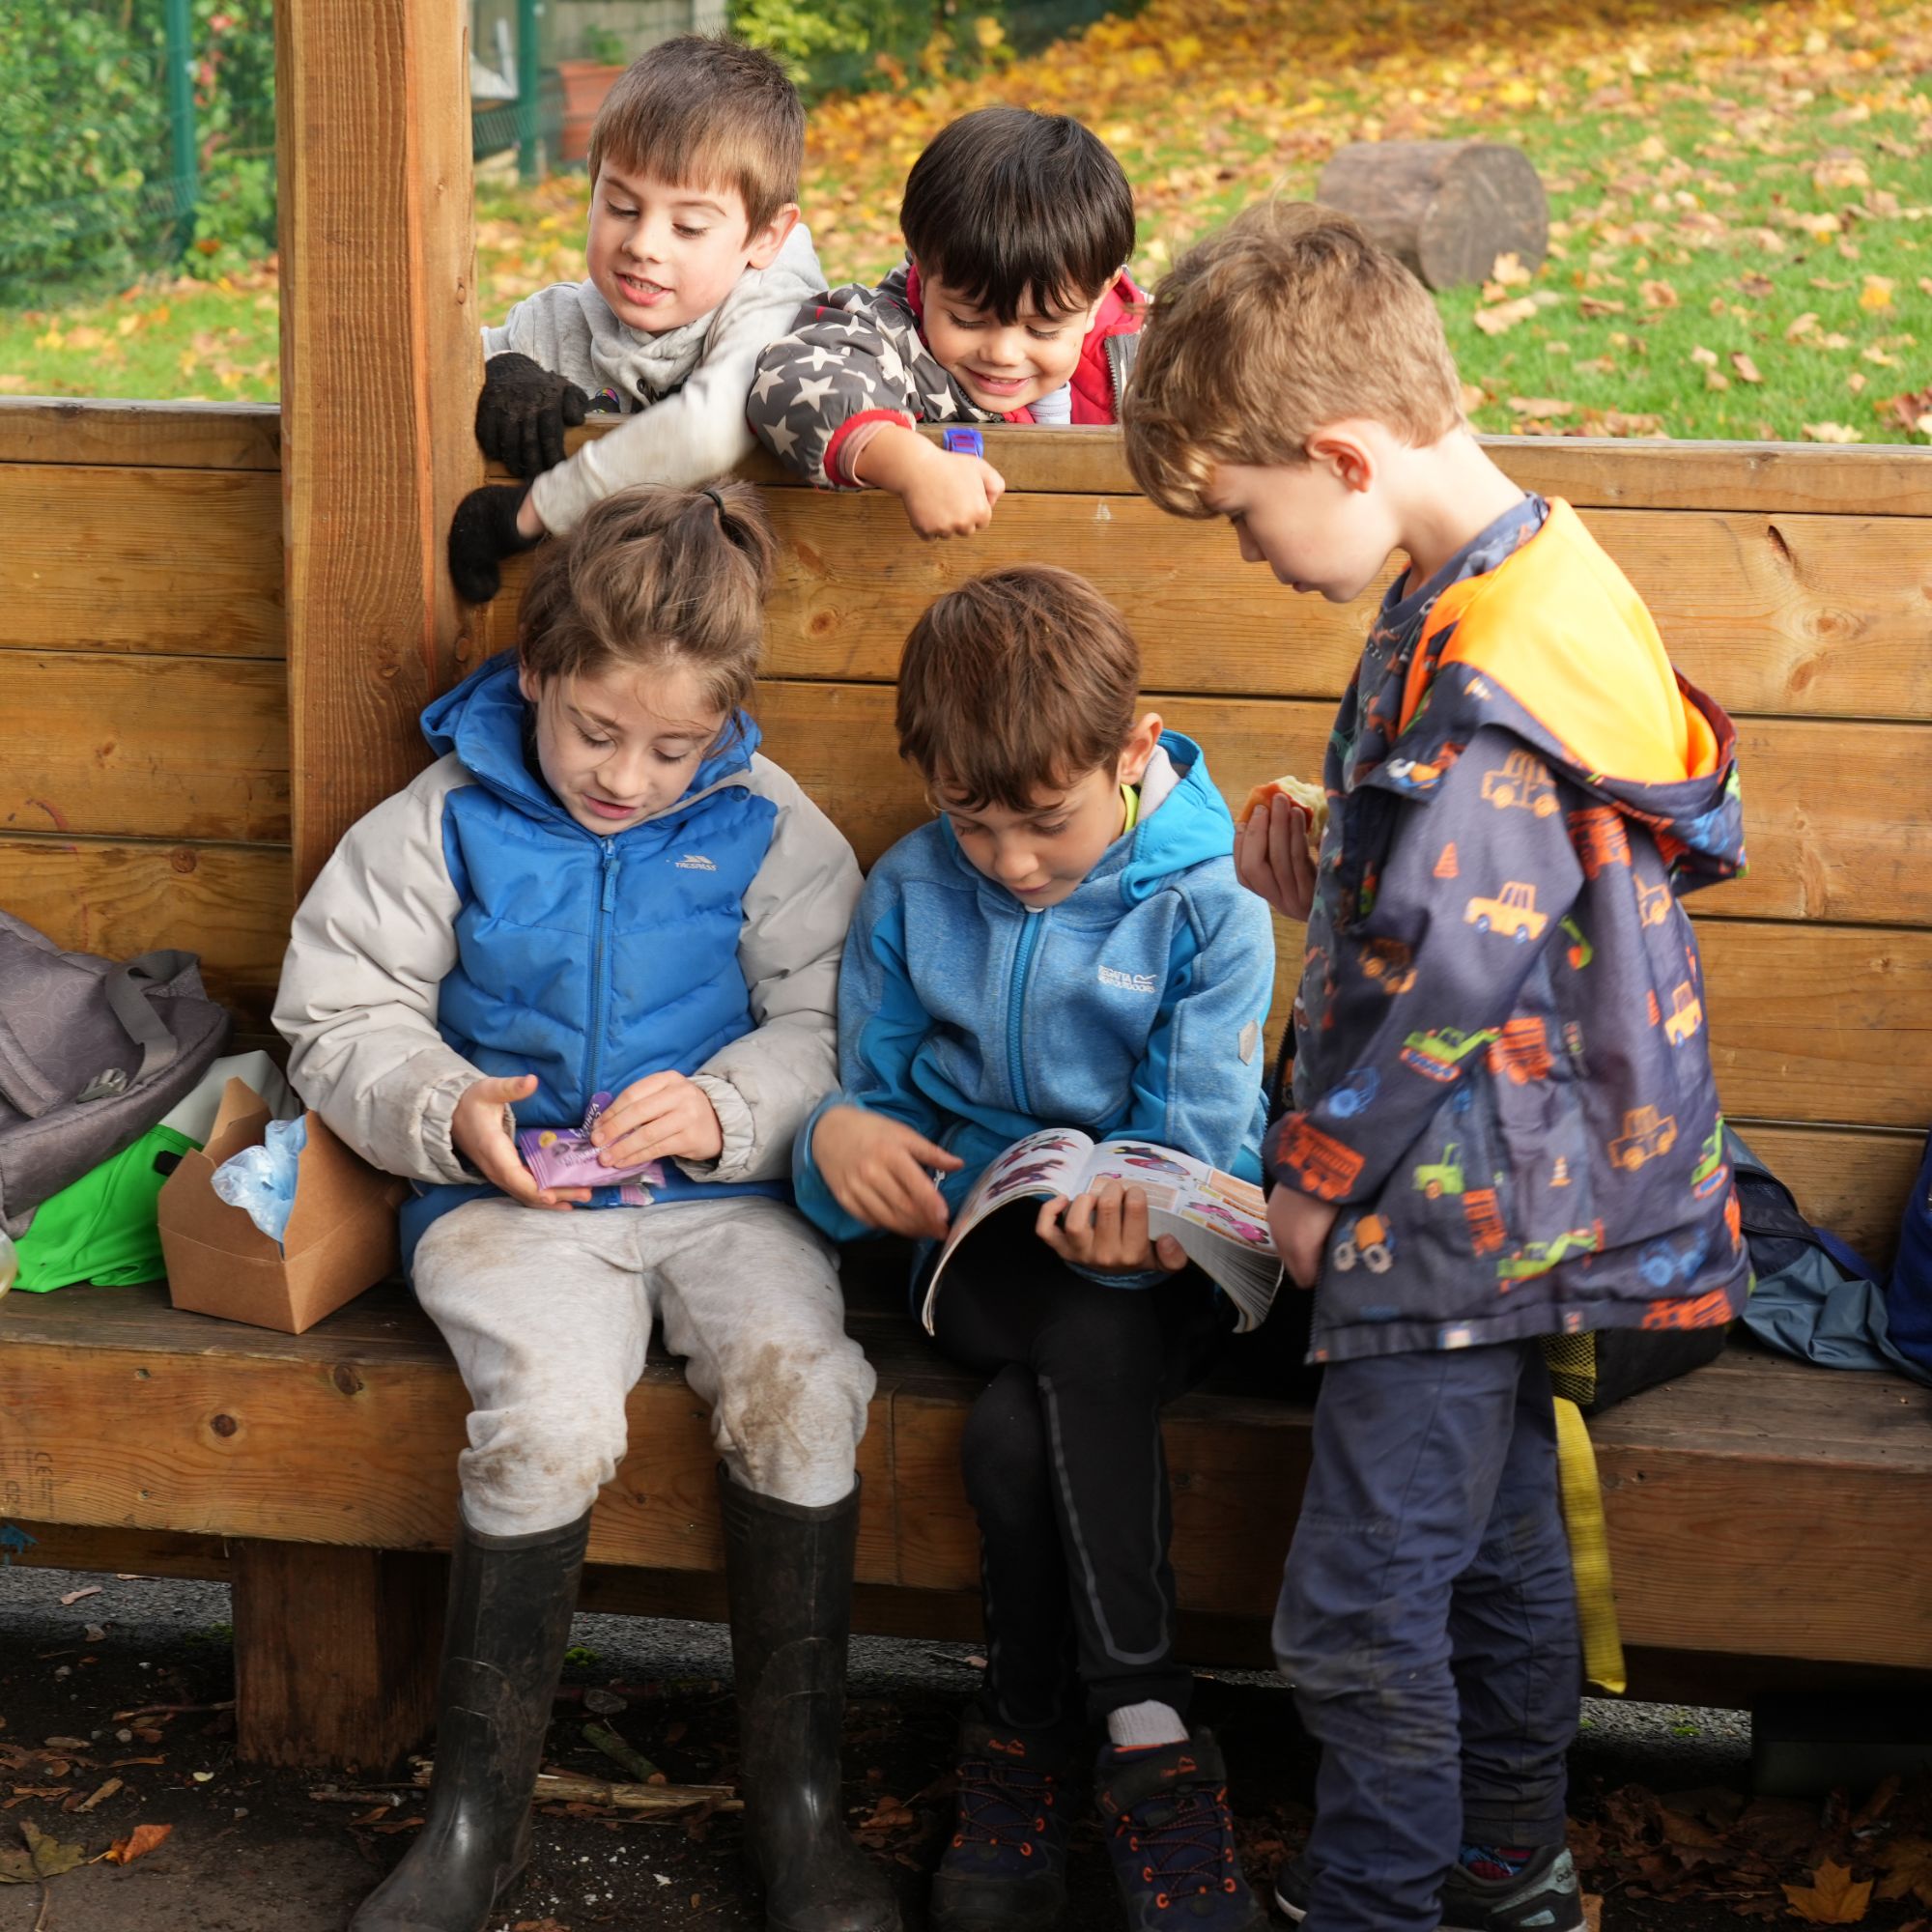 A group of children sat outside together reading a book.